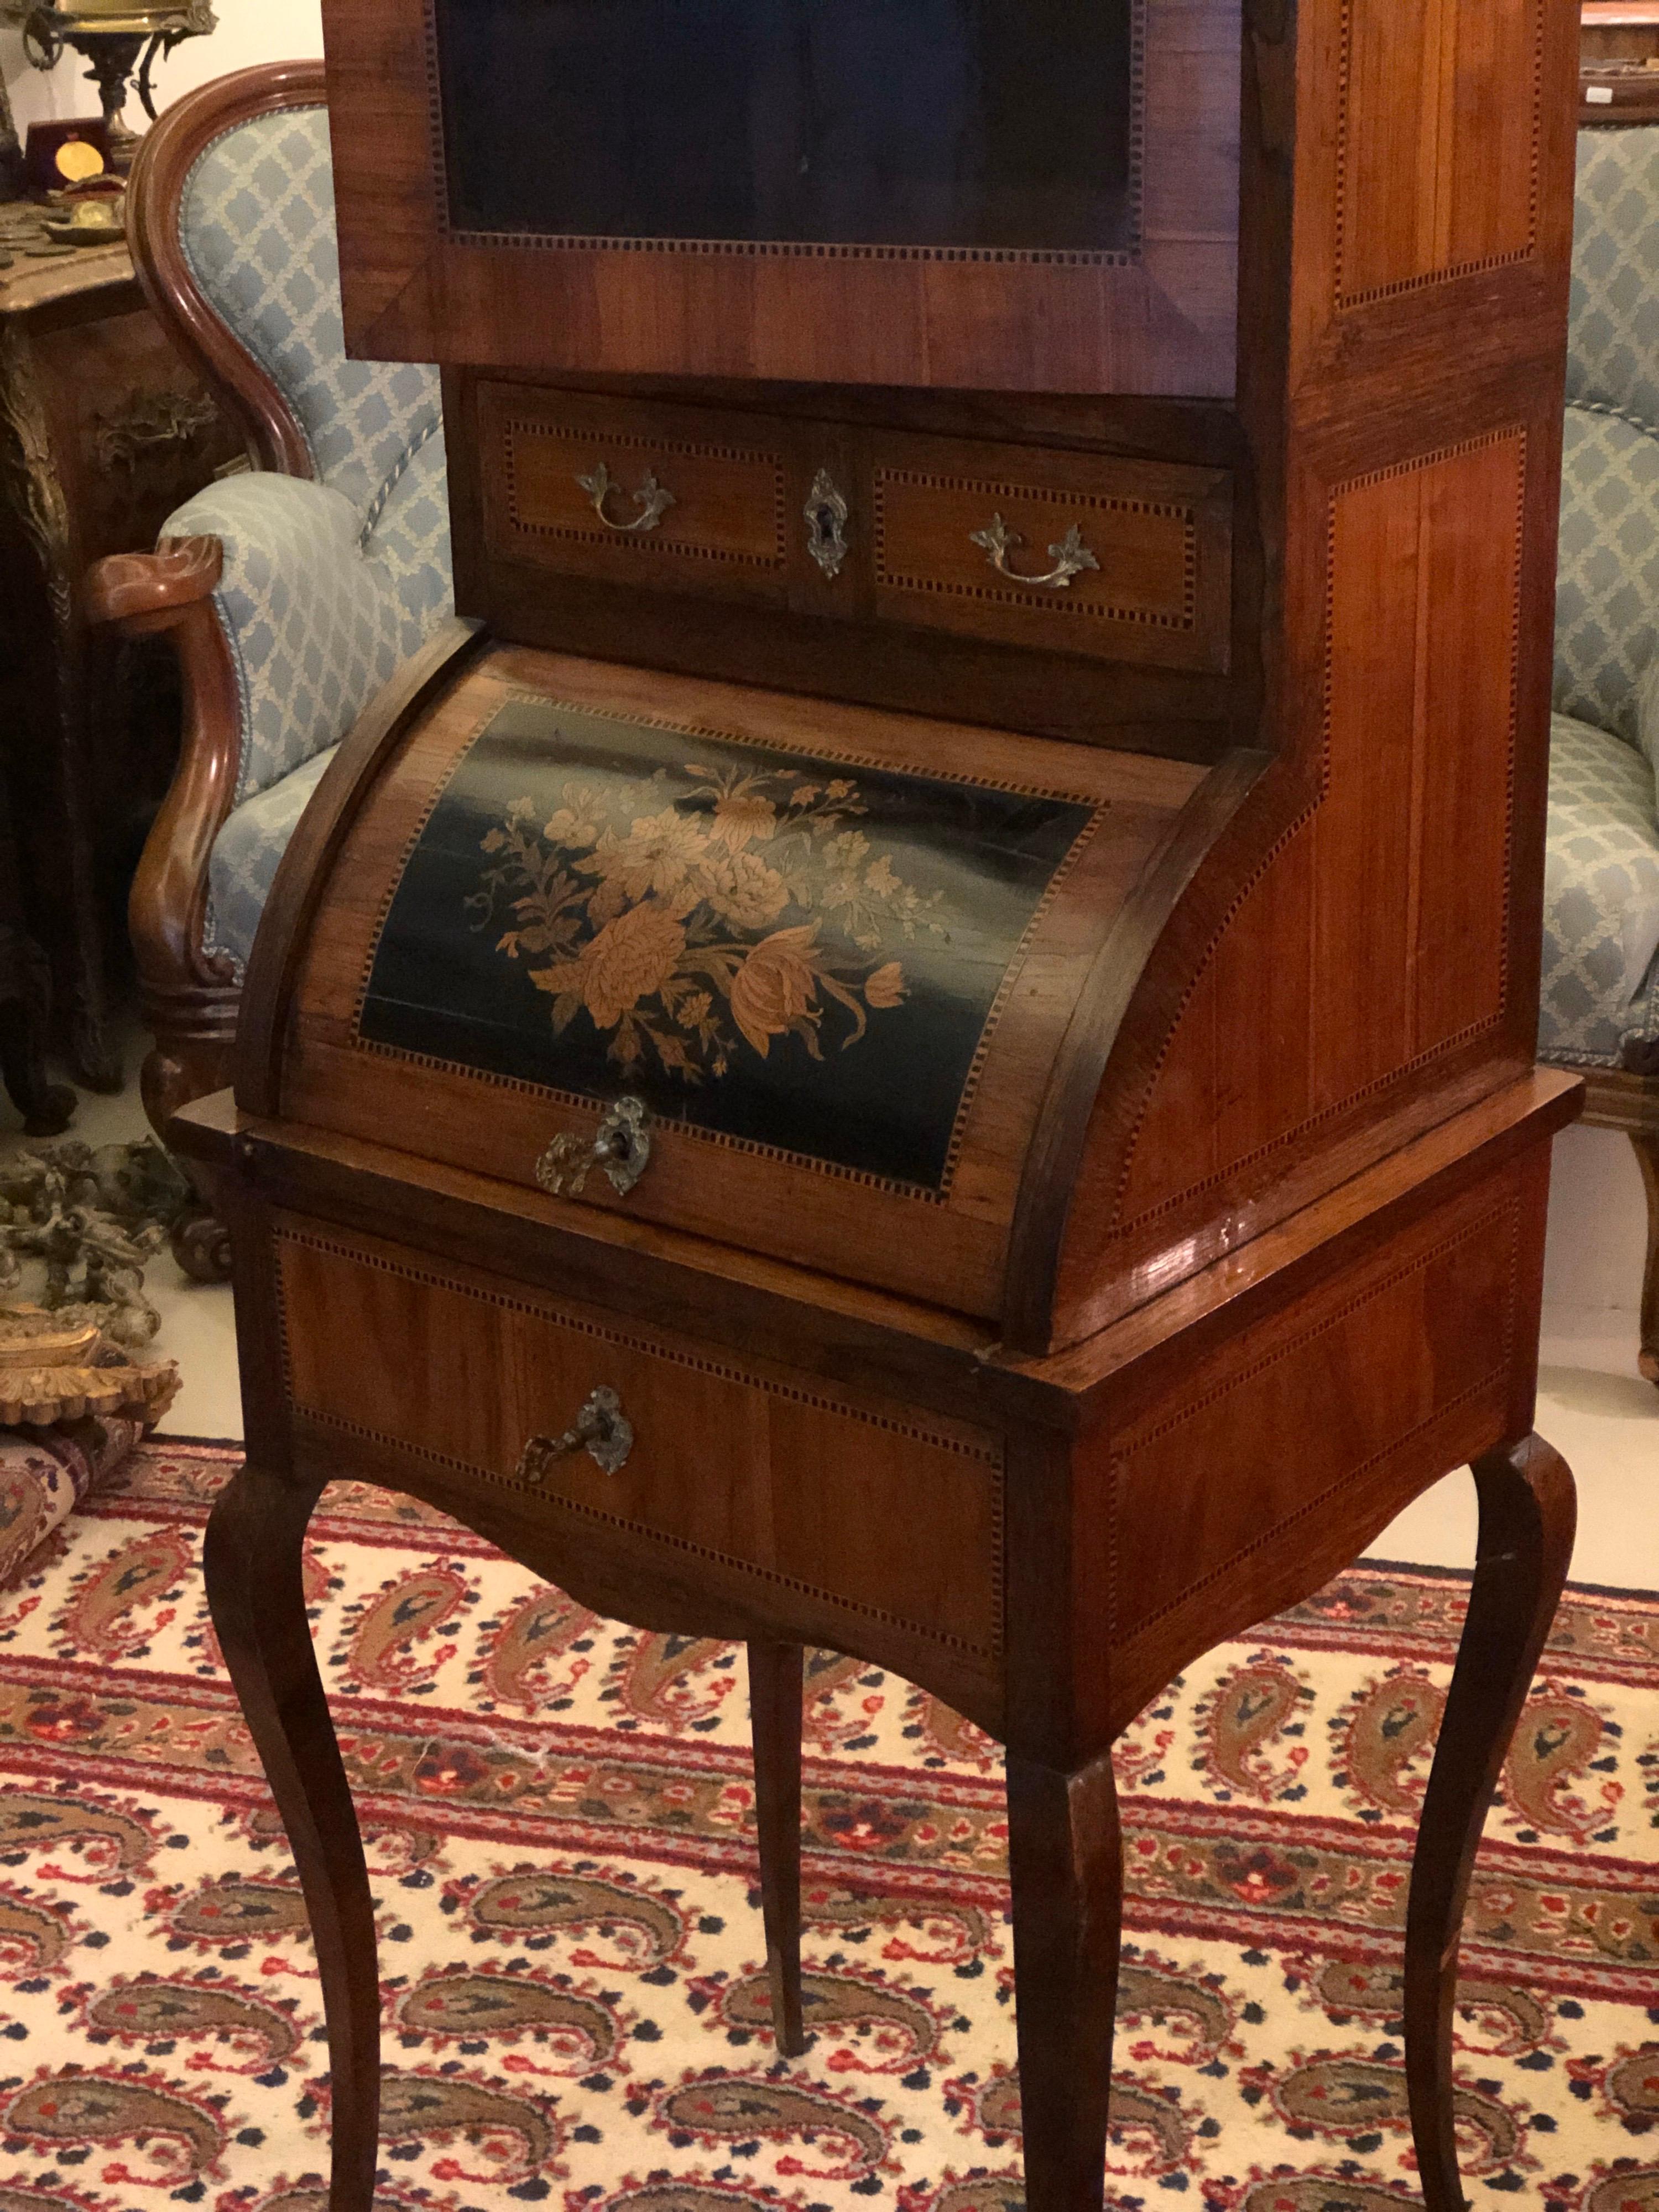 This is a beautiful French antique mahogany inlaid ladies writing desk, circa 1870 in date. The fall front opens to reveal an interior of writing surface, and bank of two drawers. The top has a vitrine with glass front door and white marble top. The